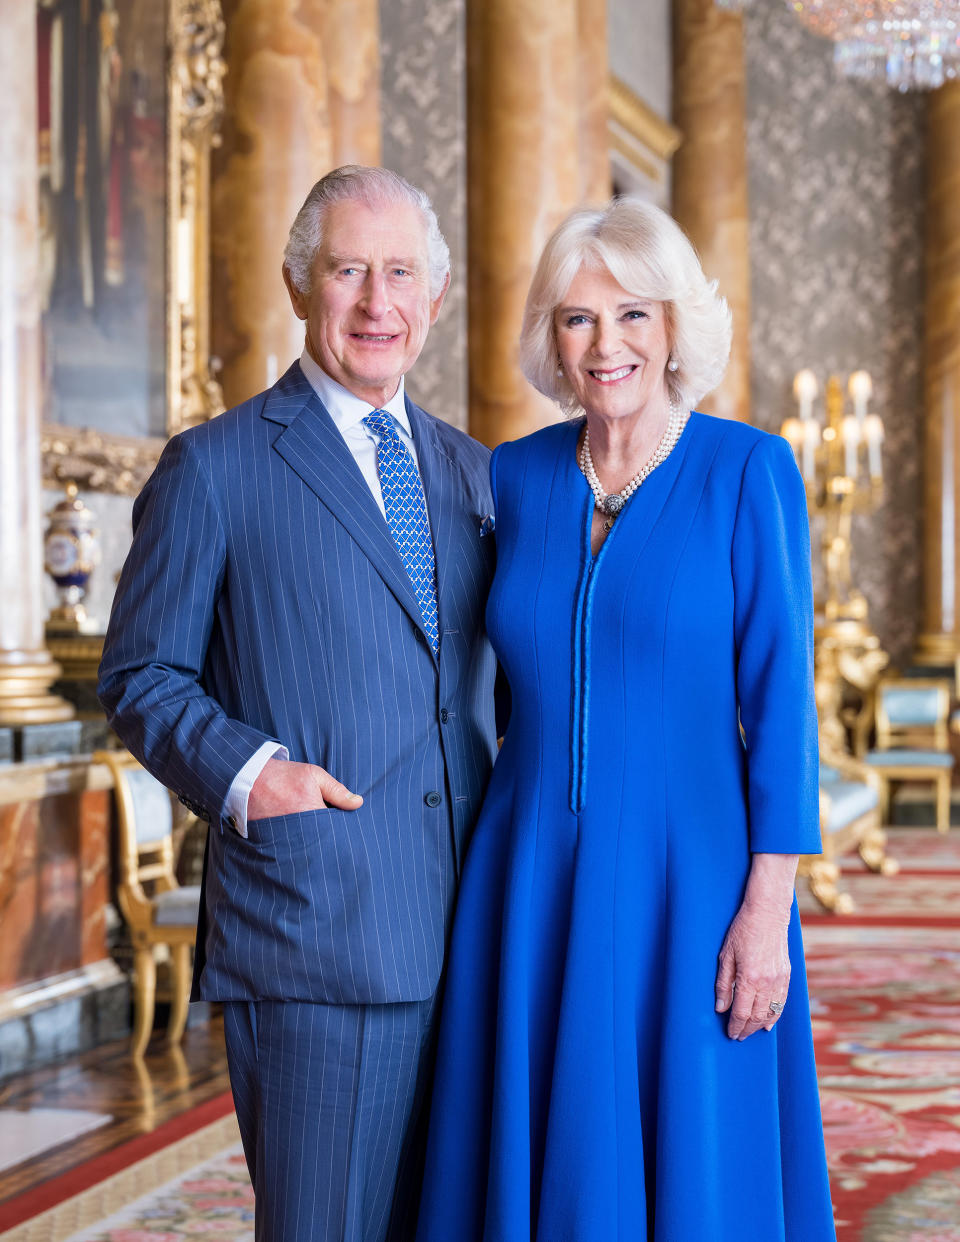  In this handout images released by Buckingham Palace, King Charles III and Camilla, Queen Consort pose for a portrait in the Blue Room at Buckingham Palace on April 4, 2023 in London, England.  (Hugo Burnand / Buckingham Palace via Getty Images)